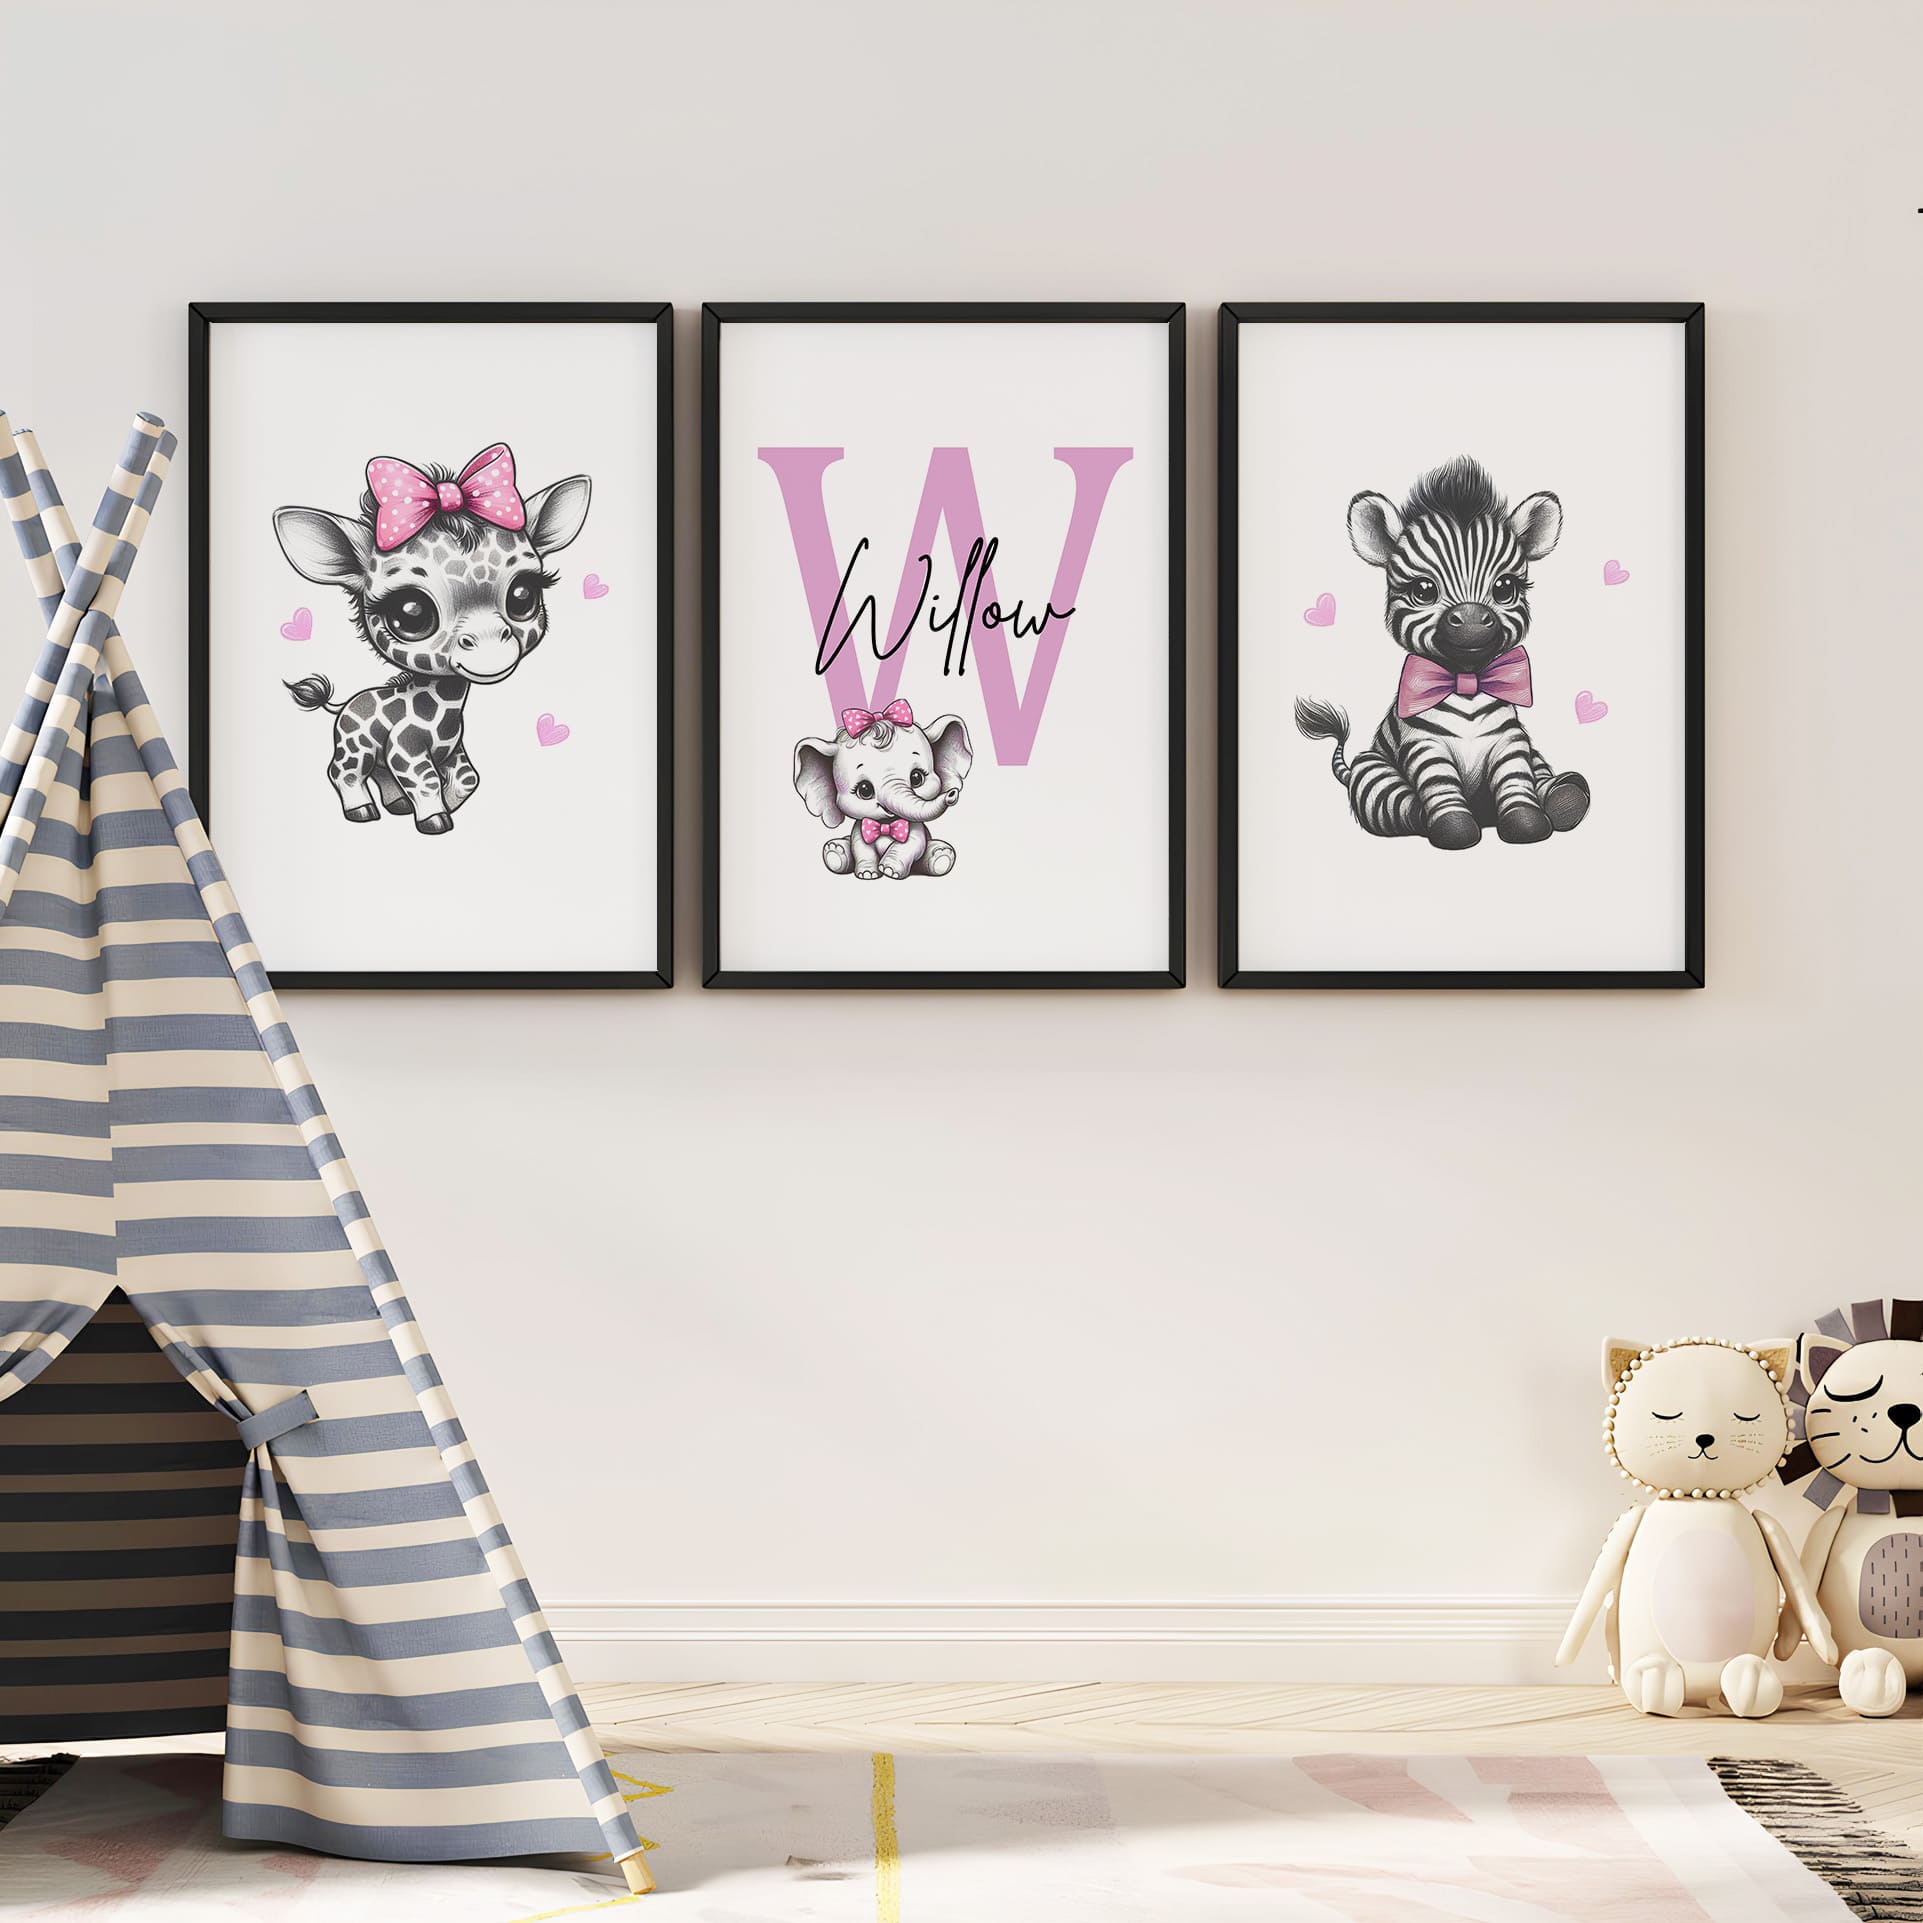 Set of three A4 prints in the style of pencil drawings. Each print features a cartoon baby giraffe, baby elephant, and baby zebra in black and white. They all wear a pink bow, with a few small pink hearts in the background. The middle image contains the elephant, which is smaller than the other two images. In the background, there is a large initial with a personalised name in black.